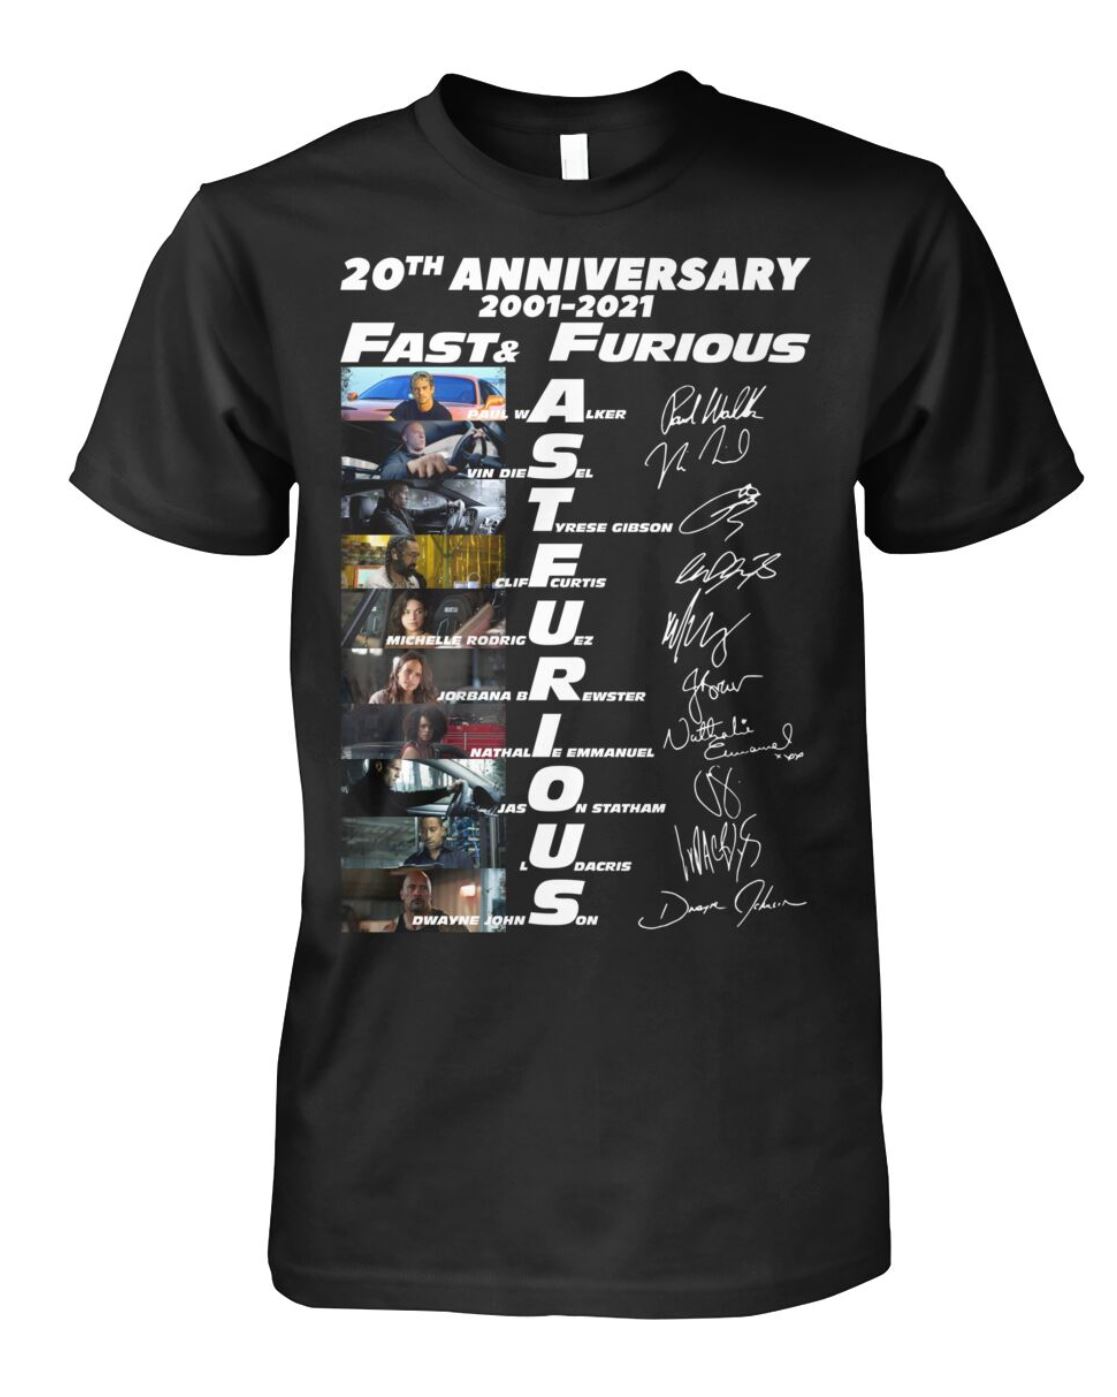 20th anniversary fast and furious shirt